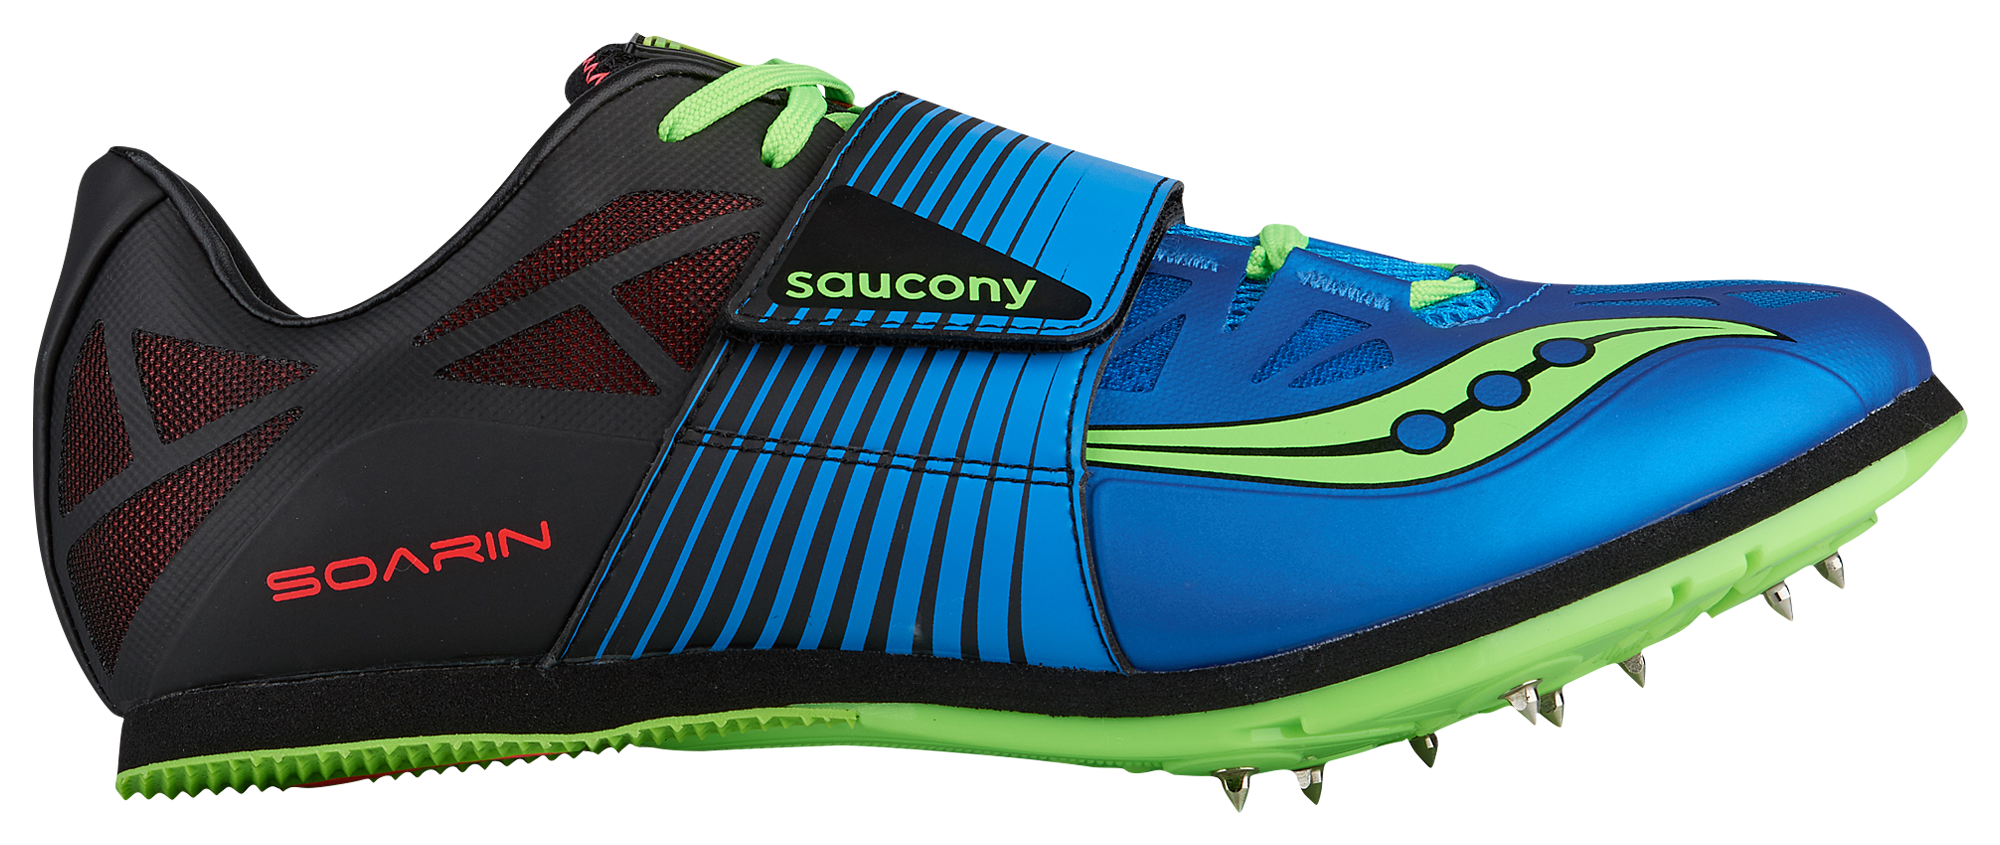 eastbay saucony track spikes